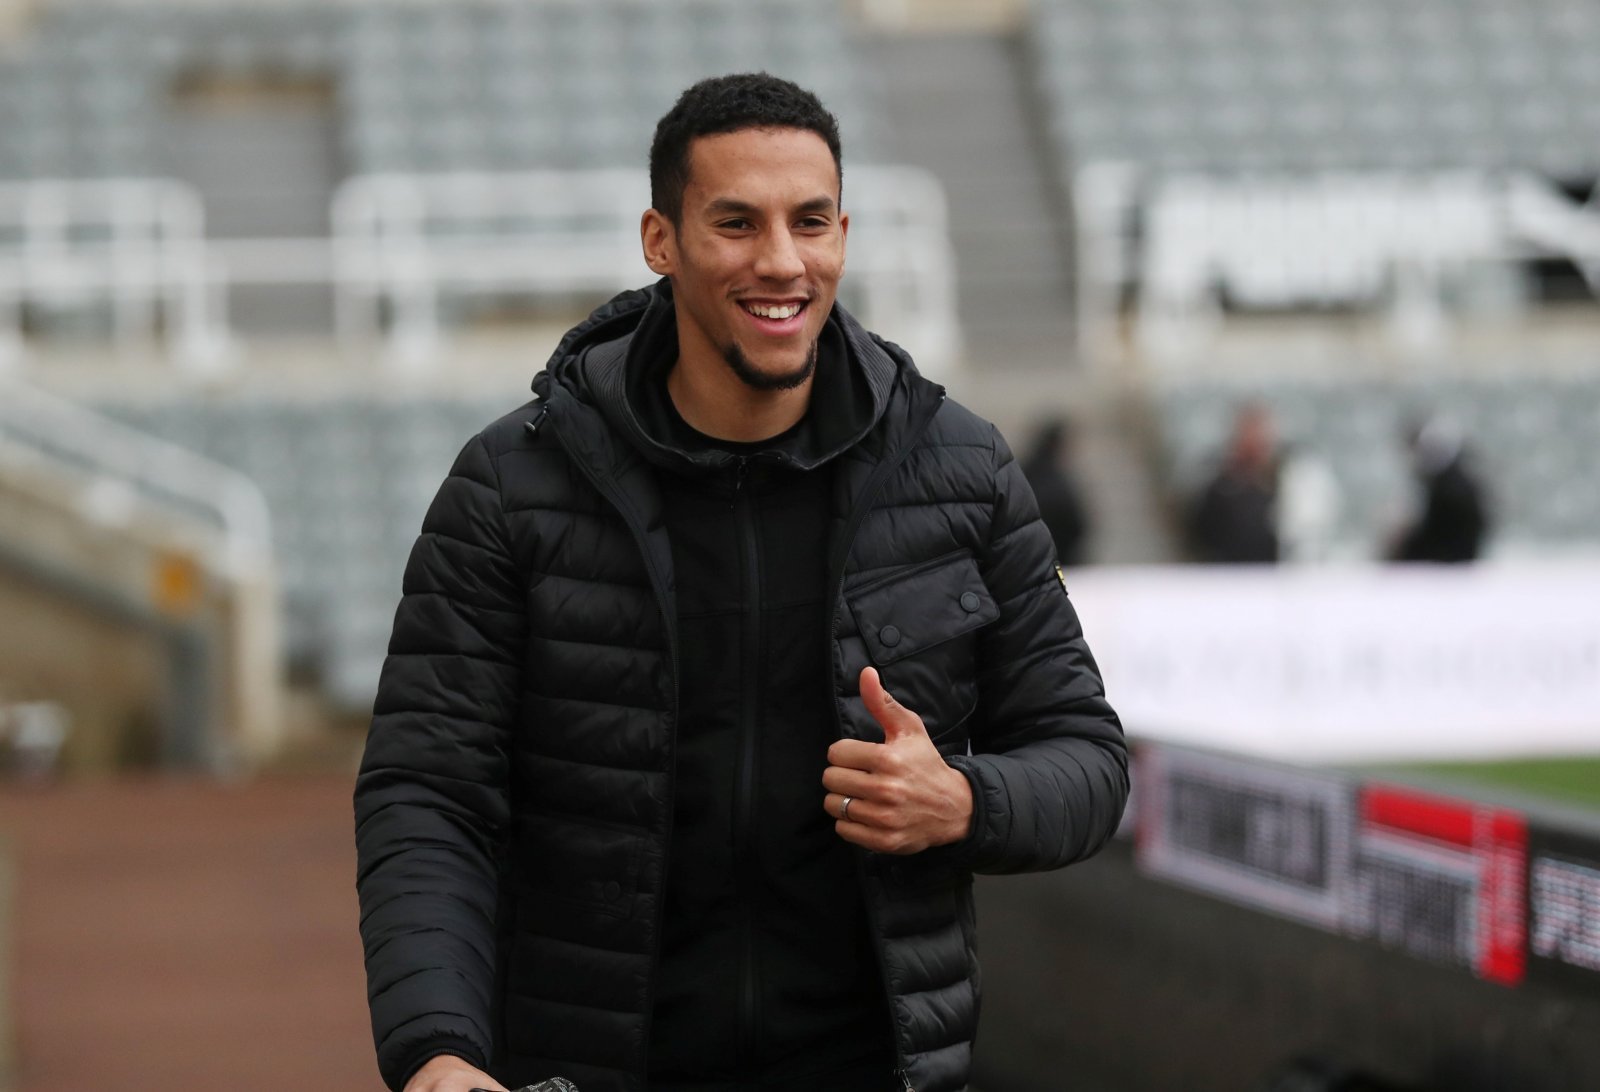 'Everything happens for a reason' - Newcastle ace drops cryptic message on Instagram